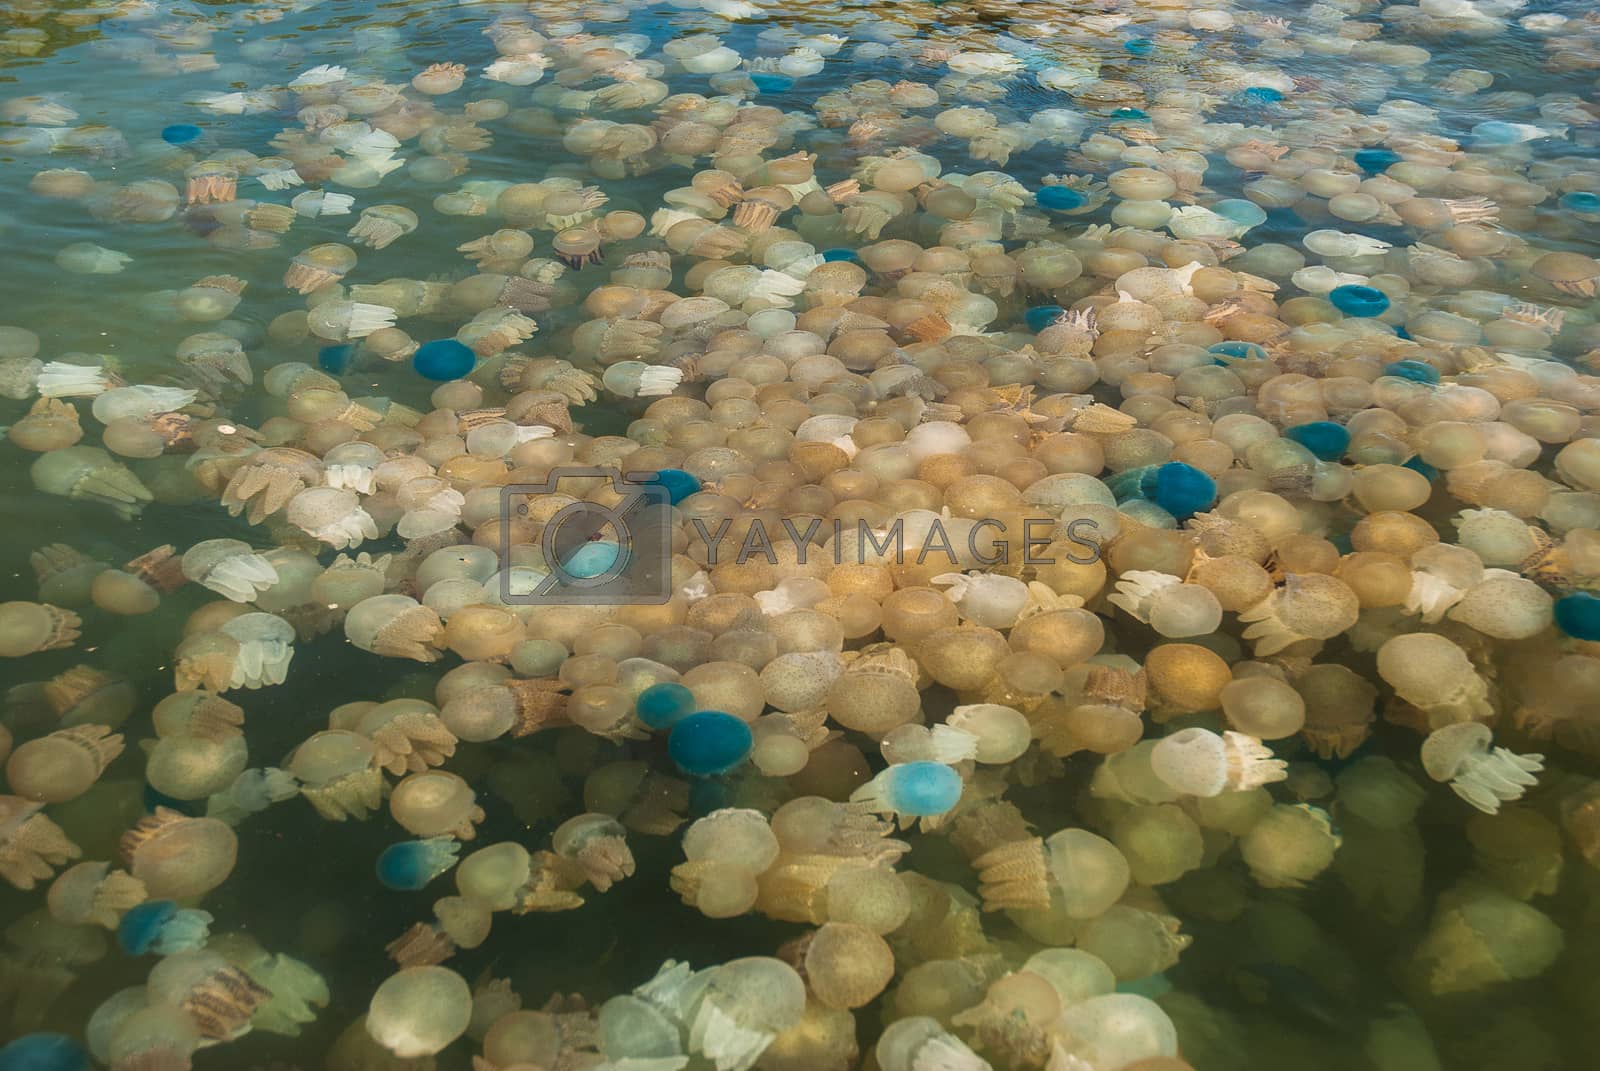 Royalty free image of Colorful blooming jellyfish in the sea, Thailand by artshura_marine